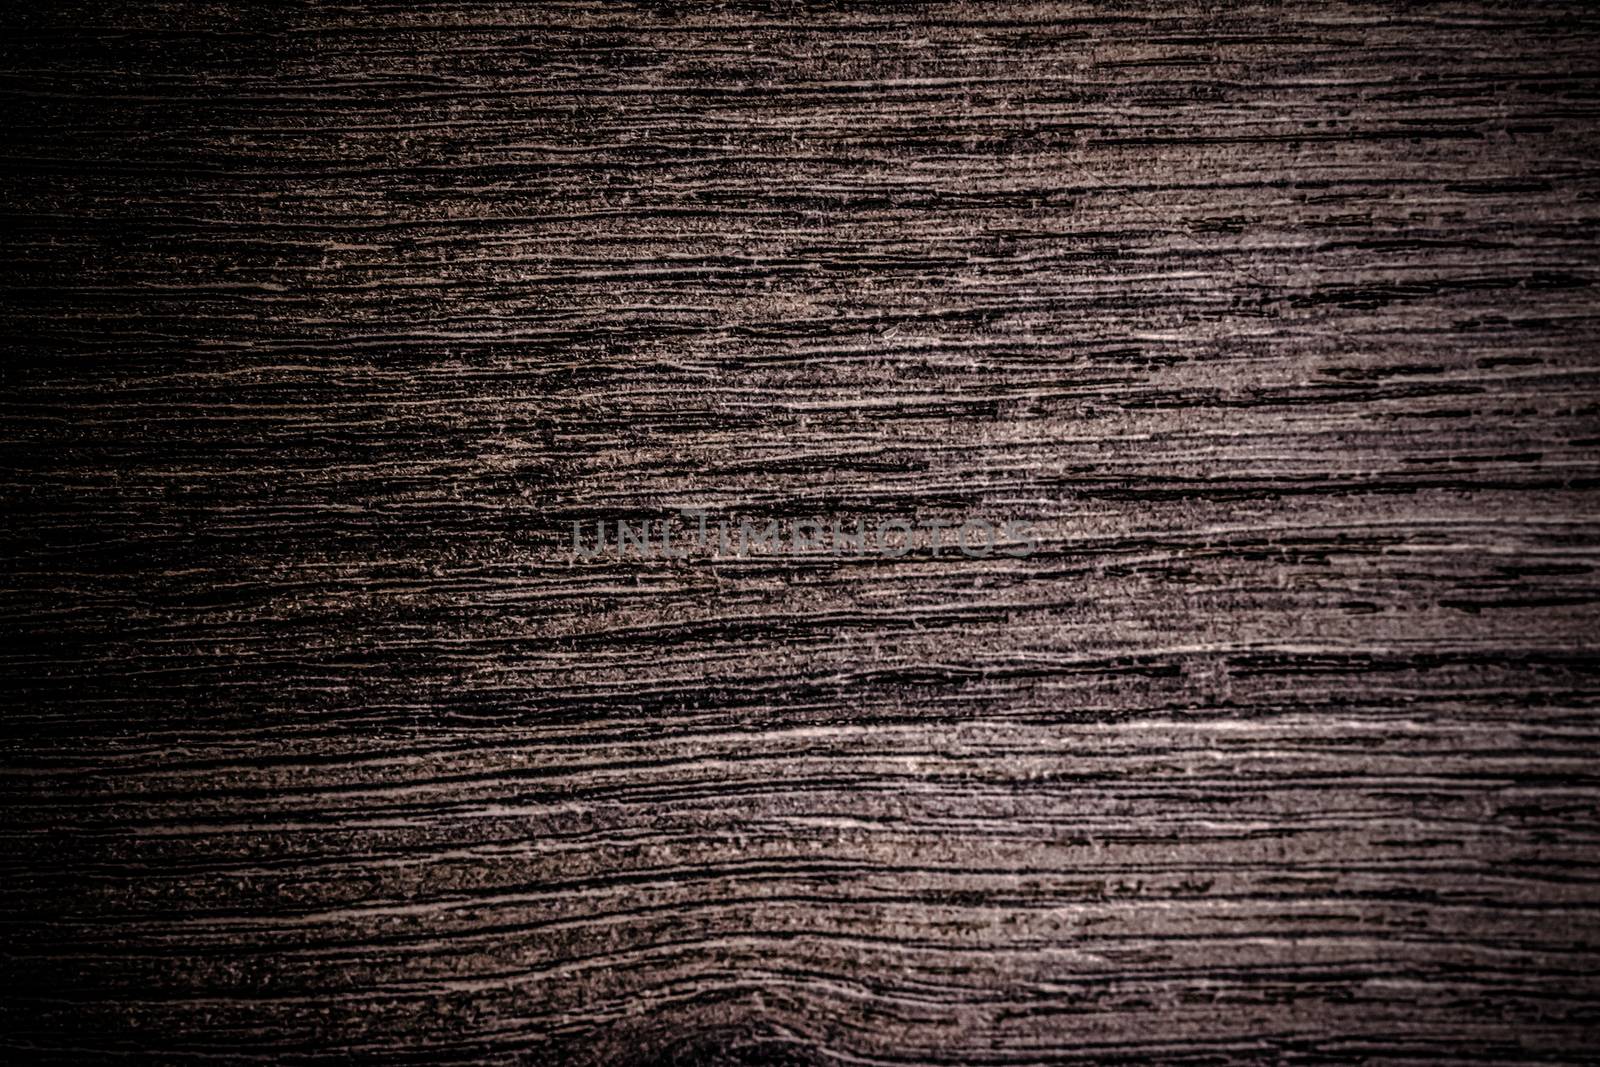 Textured, vintage and old concept - Wooden abstract background, wood material surface backdrop table flat lay, interior design, decorative texture and natural pattern for render, architectural brand